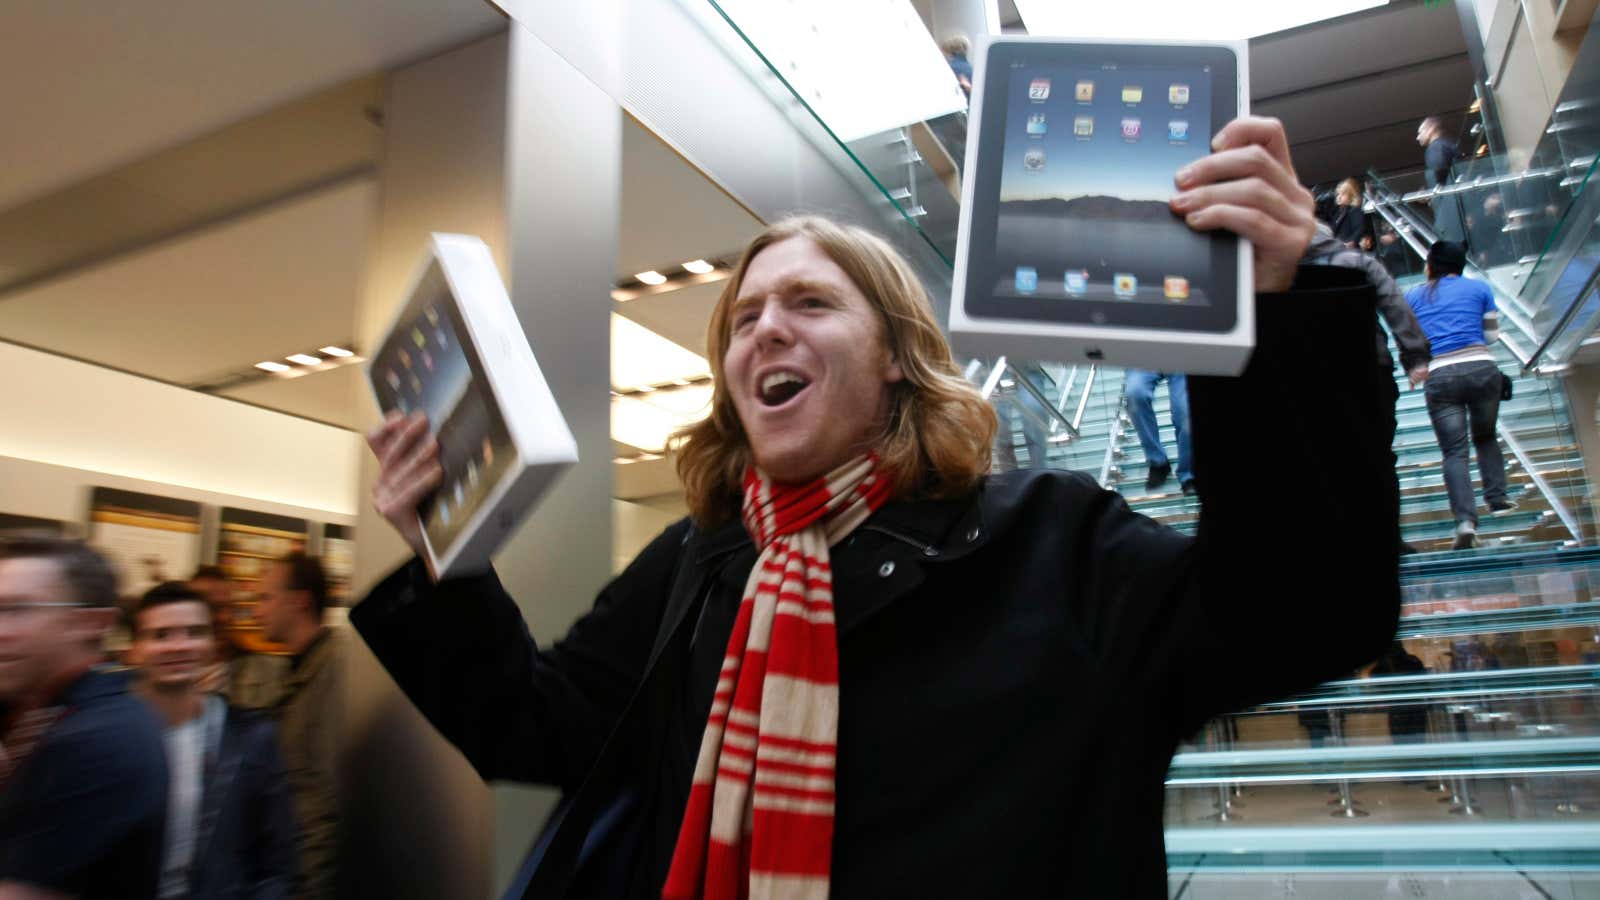 One of the first iPad buyers in San Francisco.